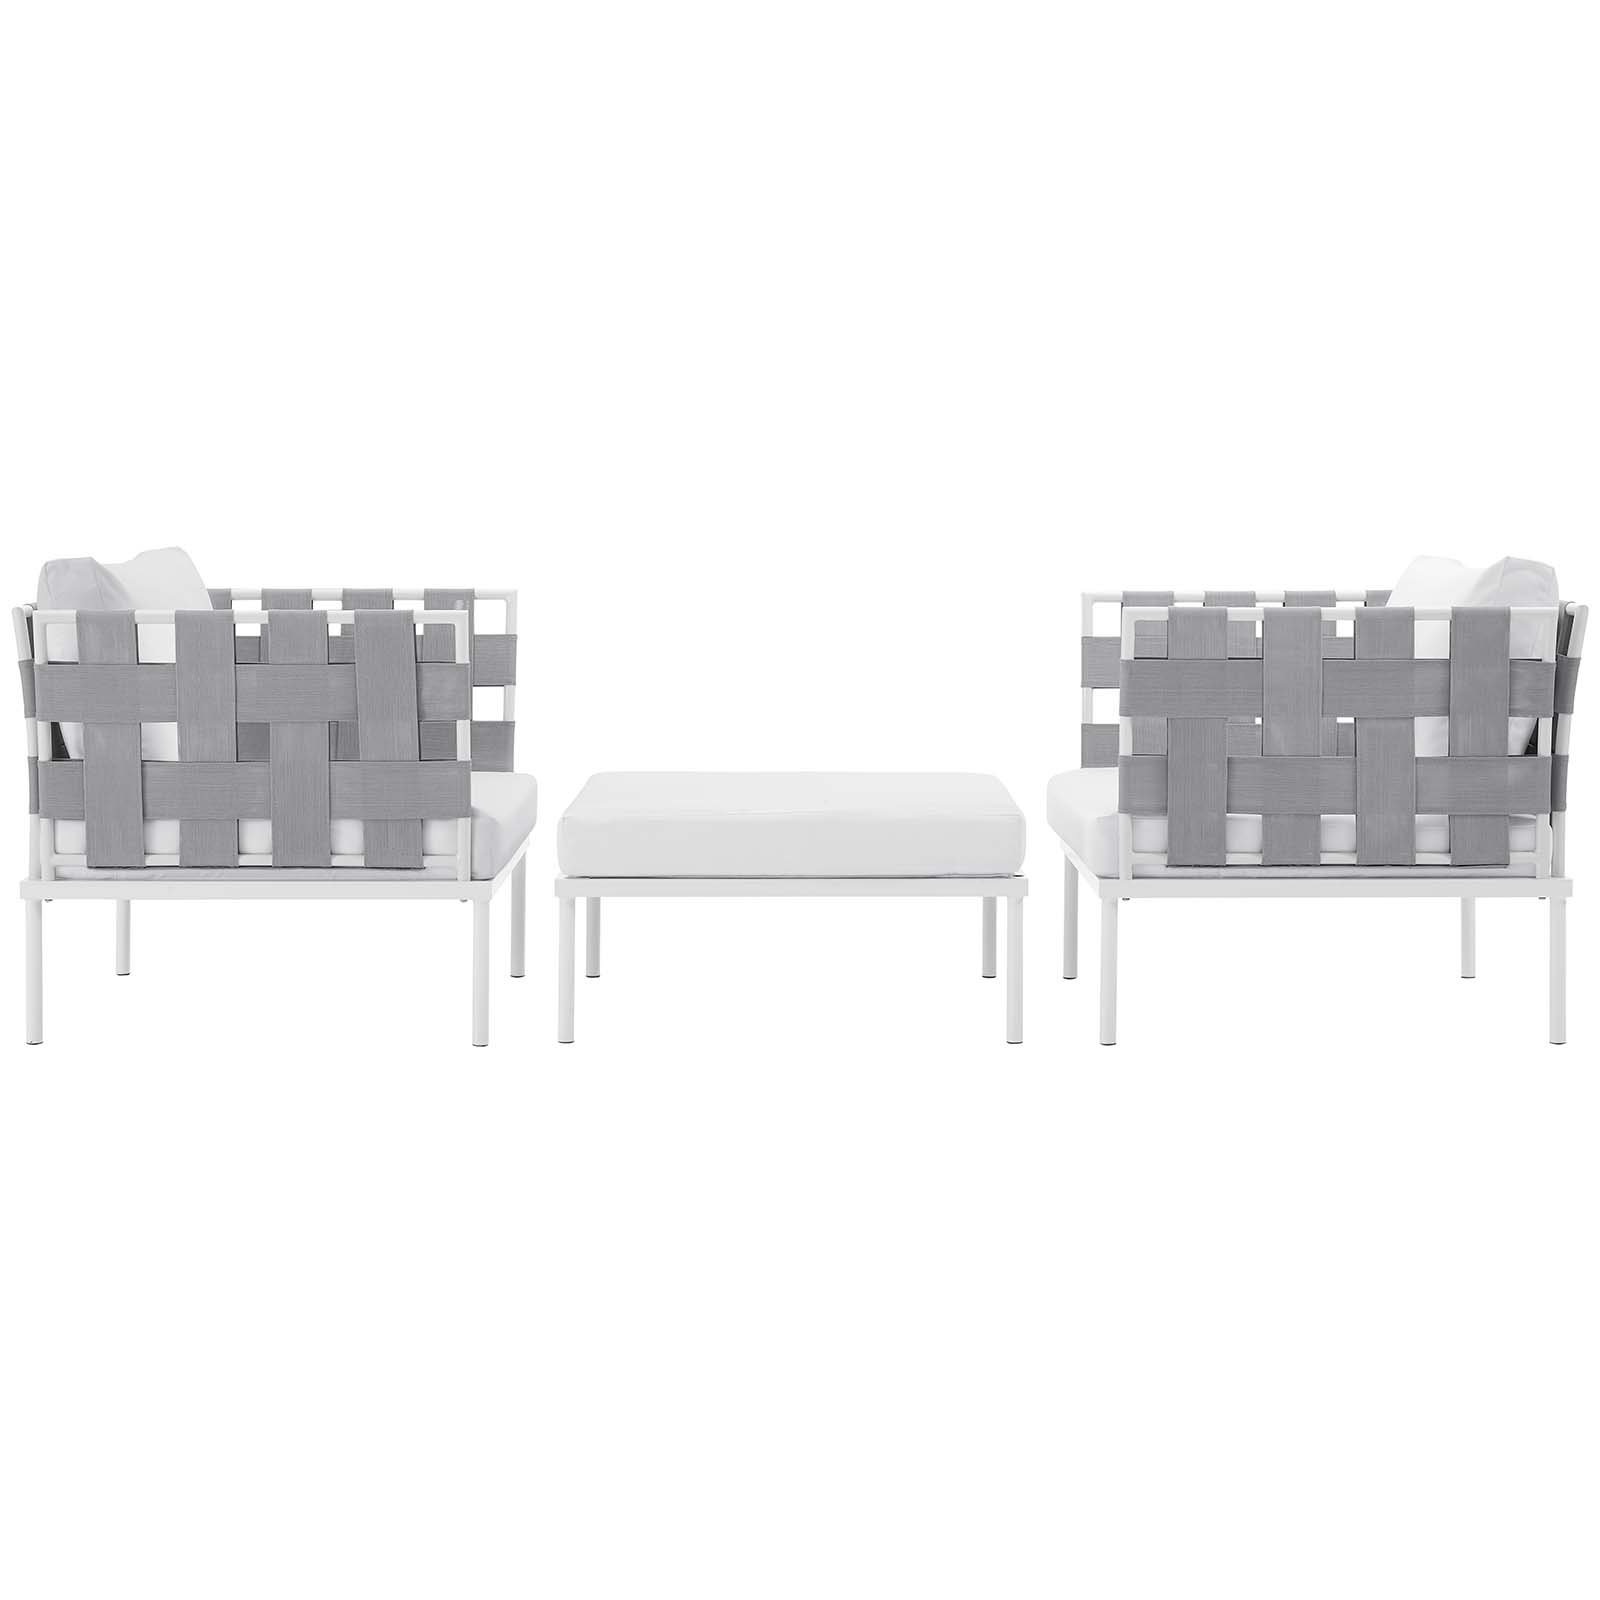 Modern Contemporary Urban Design Outdoor Patio Balcony Three PCS Chairs and Side Table Set, White, Rattan - image 3 of 6